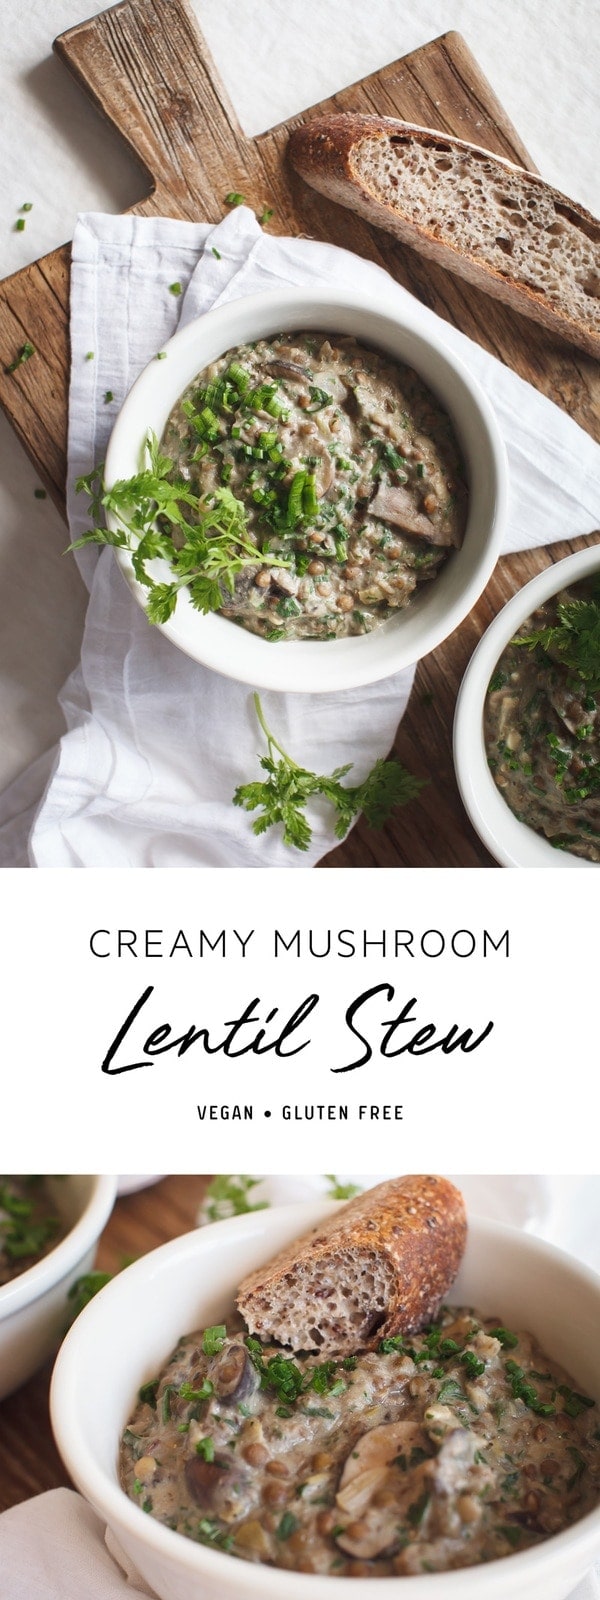 Cozy Creamy Mushroom Lentil Stew – packed full of immune supportive shiitake and fresh herbs! #mushroomstew #mushroomstewvegan #mushroomstew #mushroomstewvegetarian #mushroomstewrecipes #mushroomstewcreamy #lentilstew #lentilstewrecipe #veganstew #veganstewrecipe #veganlentilstew #AscensionKitchen // Pin to your own inspiration board! //